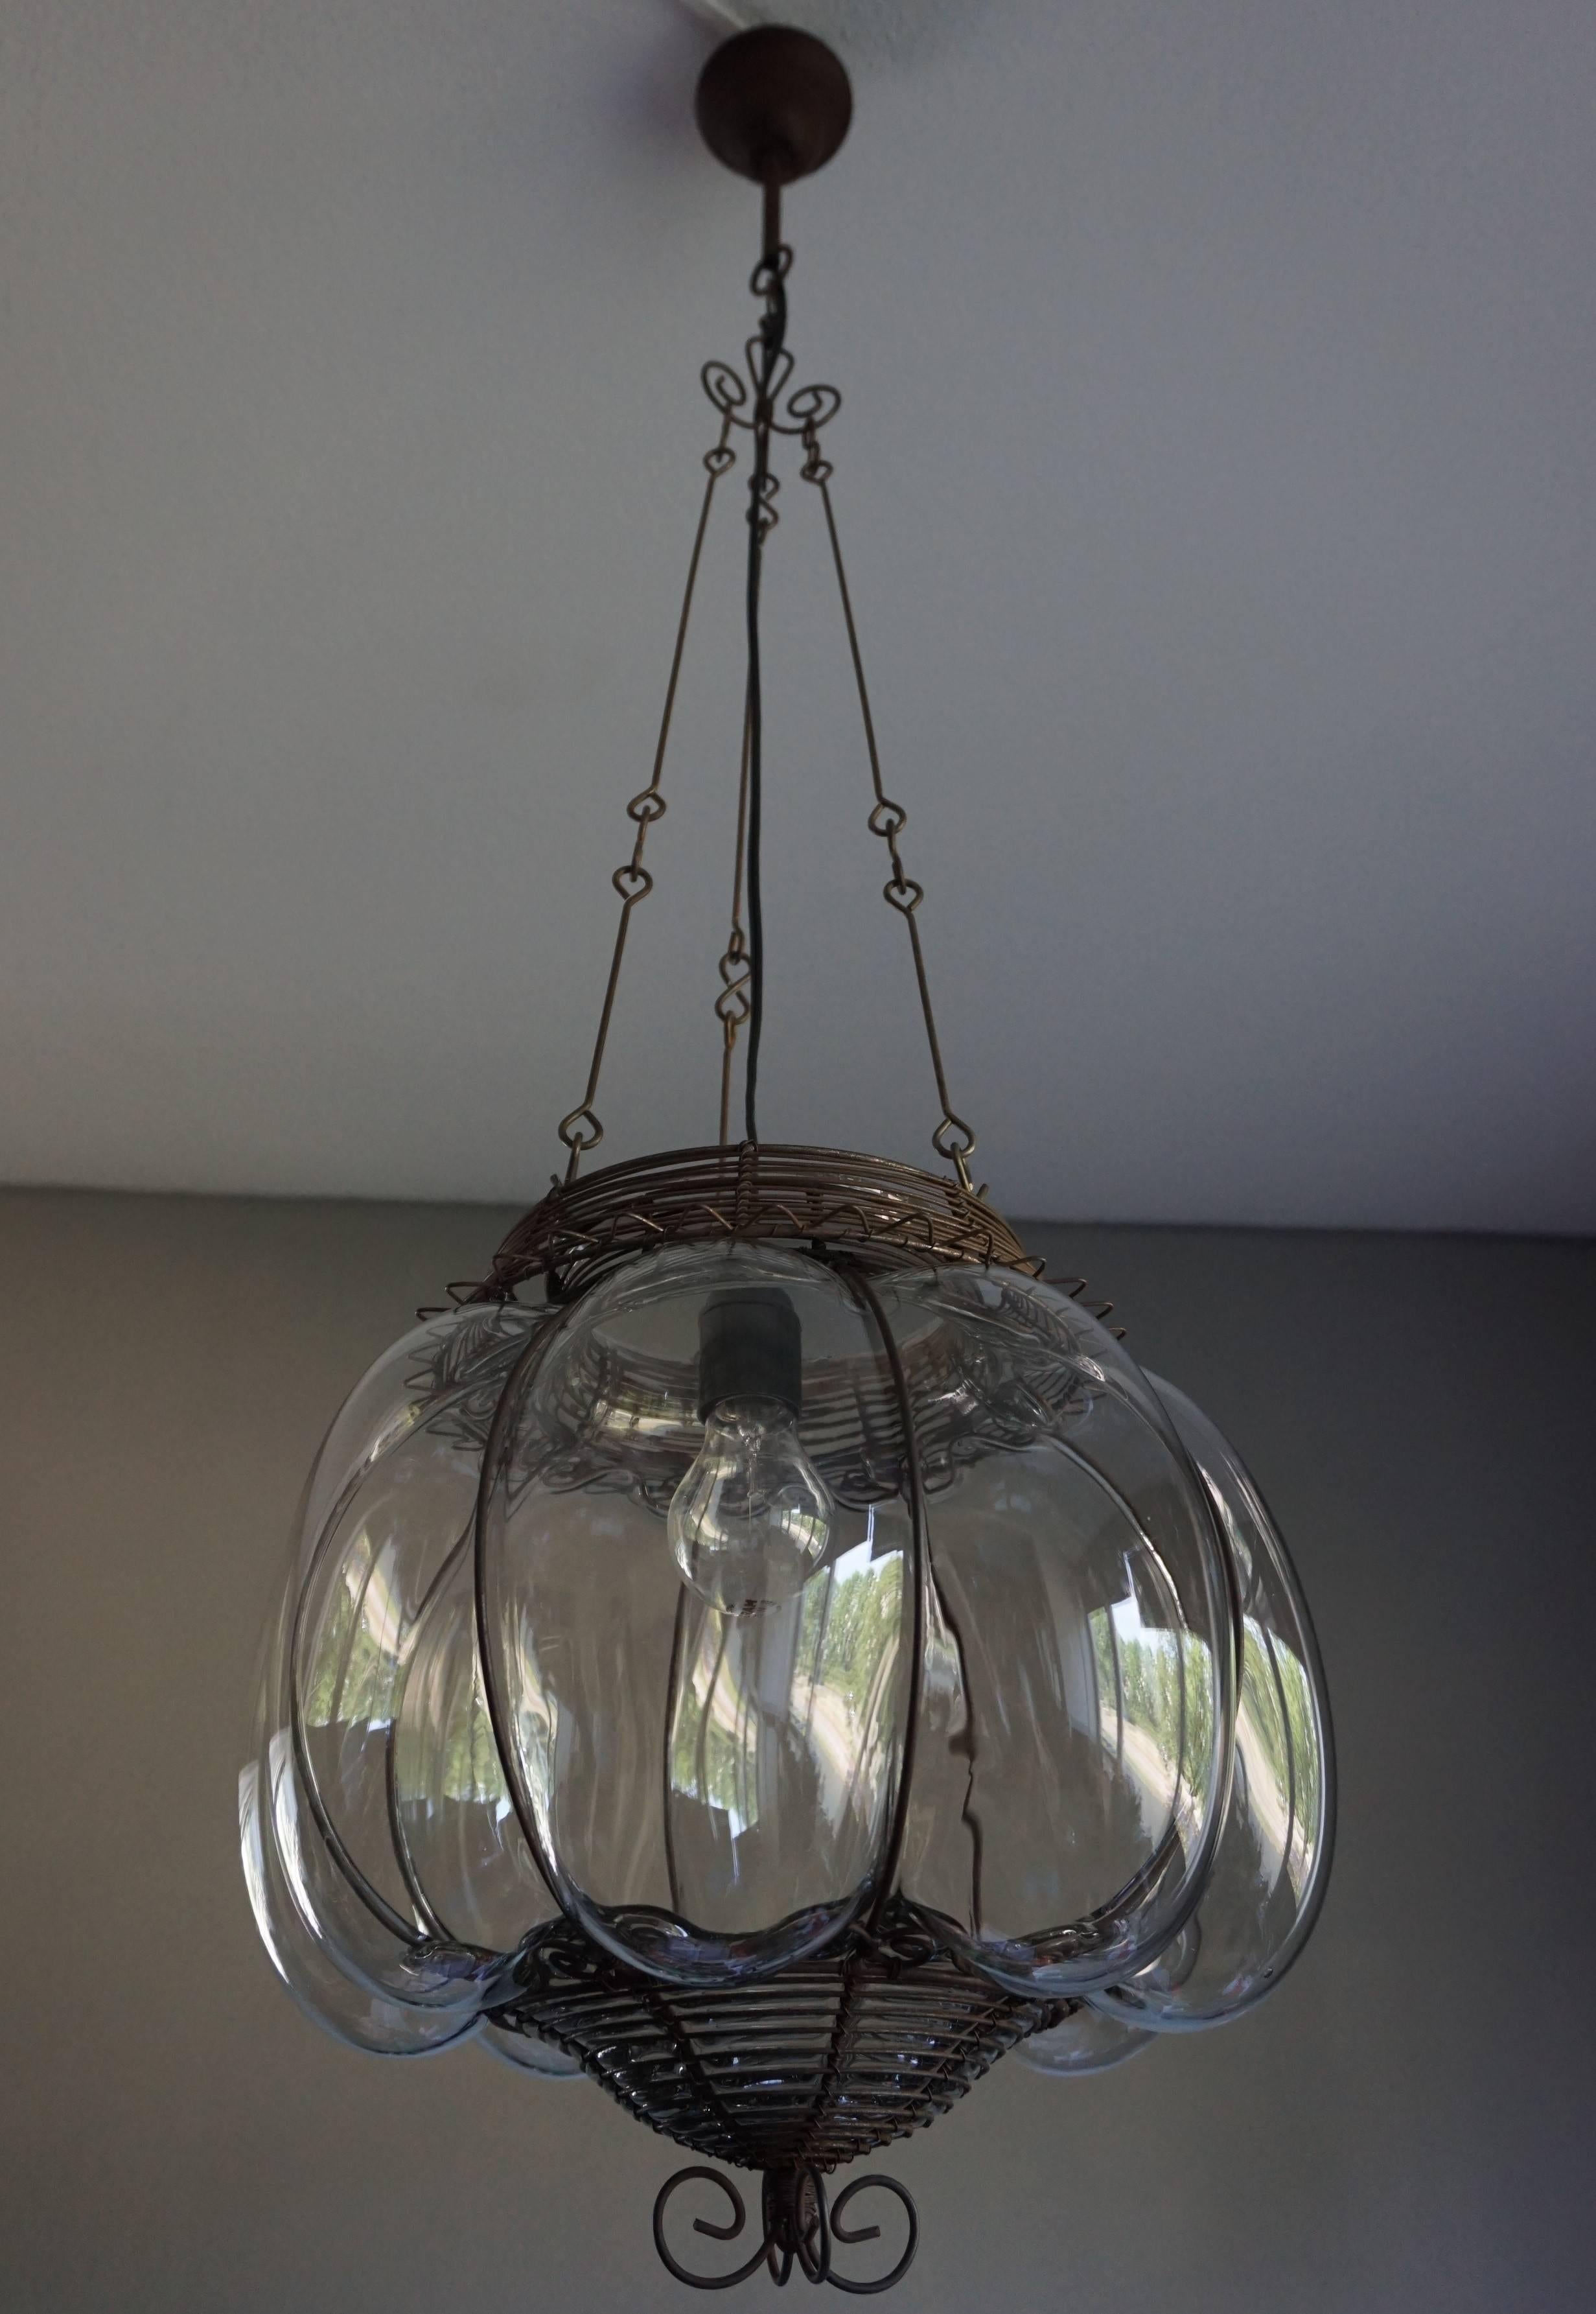 Venetian Mouthblown Glass into a Hand-crafted Iron Frame Pendant Light Fixture For Sale 12